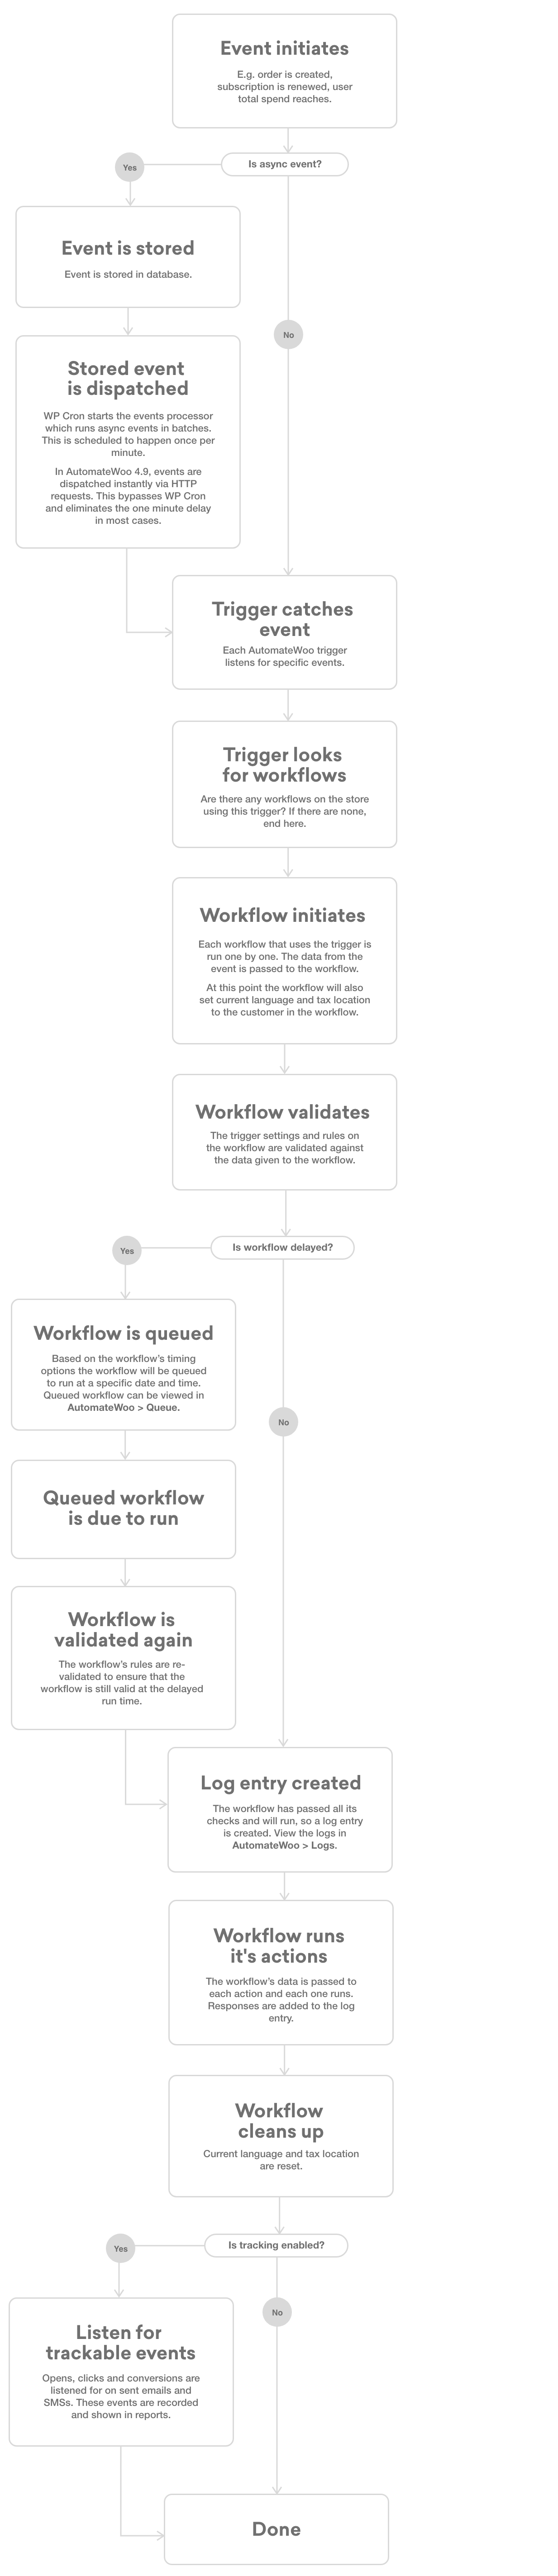 AutomateWoo-Life-cycle-of-an-event-based-workflow